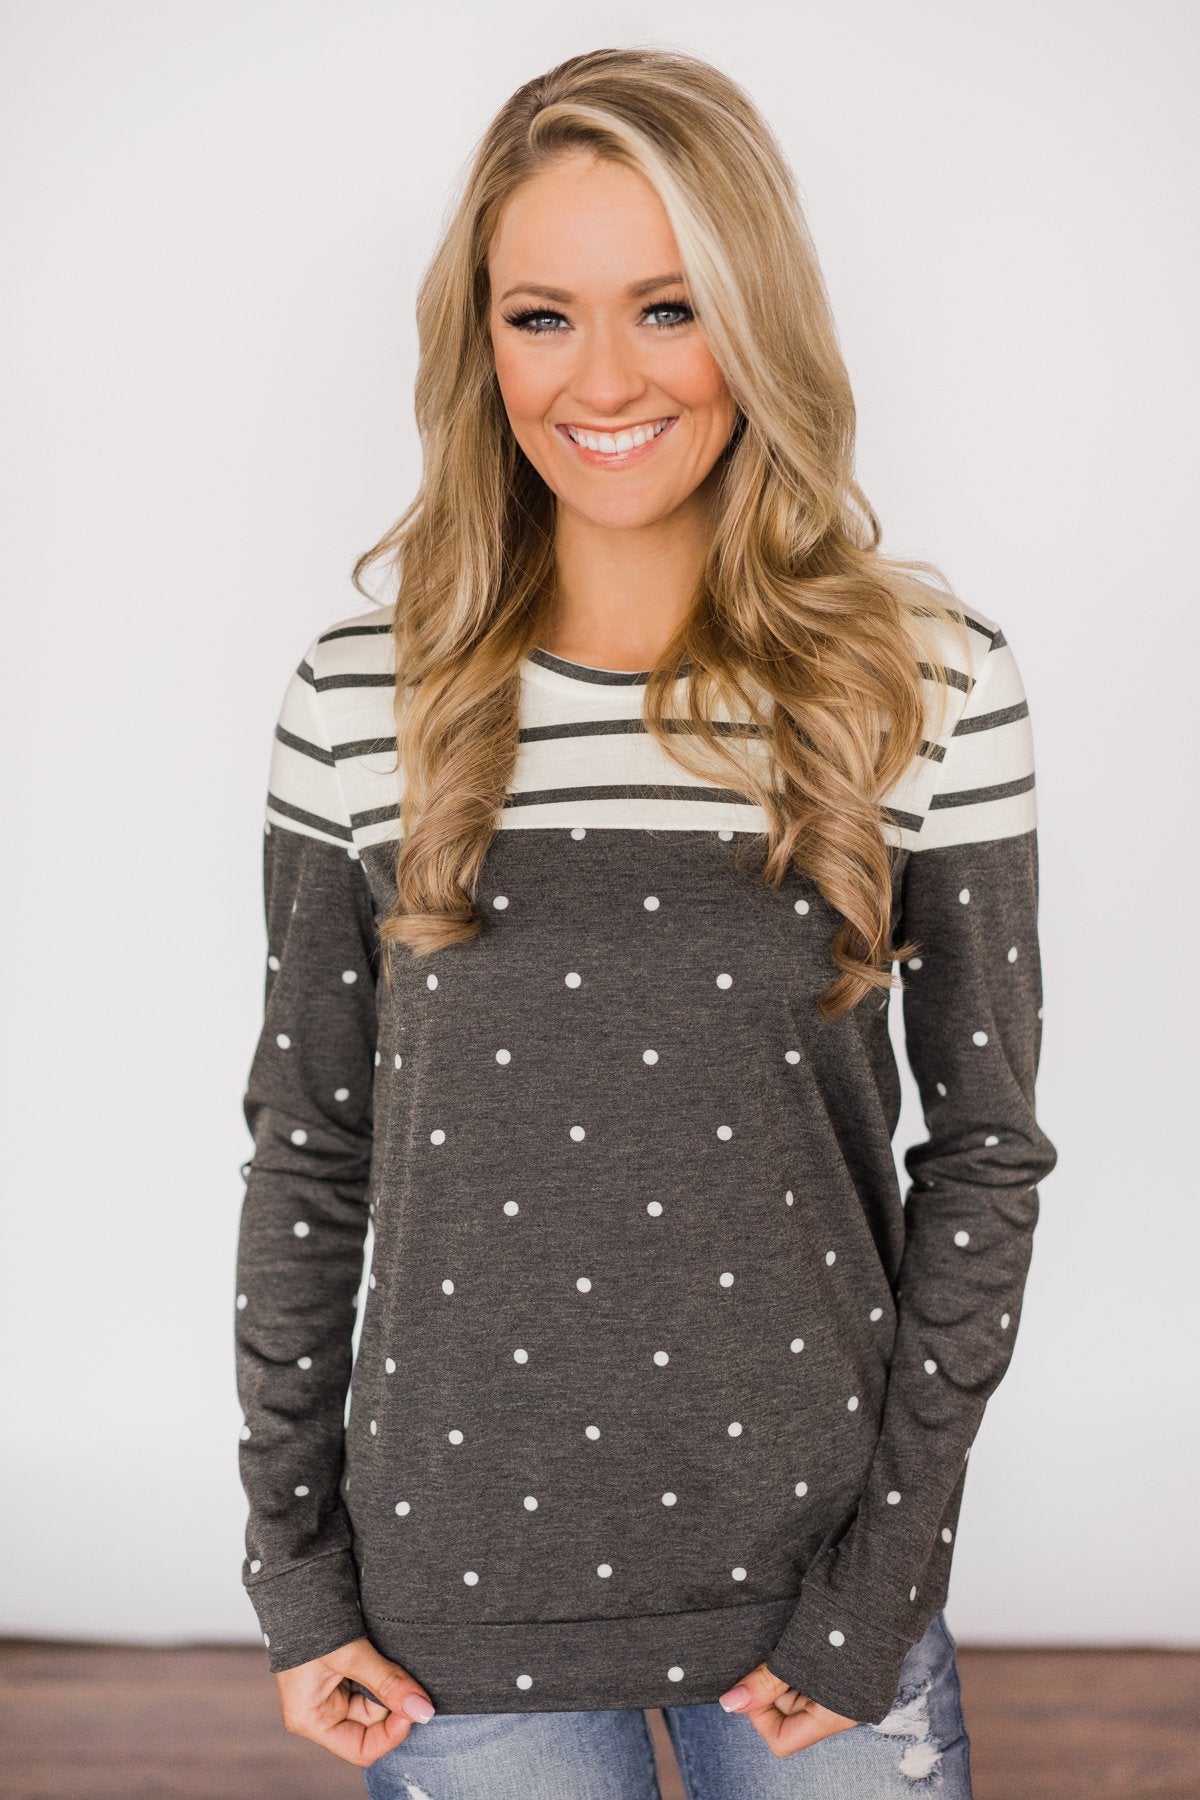 Welcome to the Party~Charcoal Polka Dot & Stripes Top